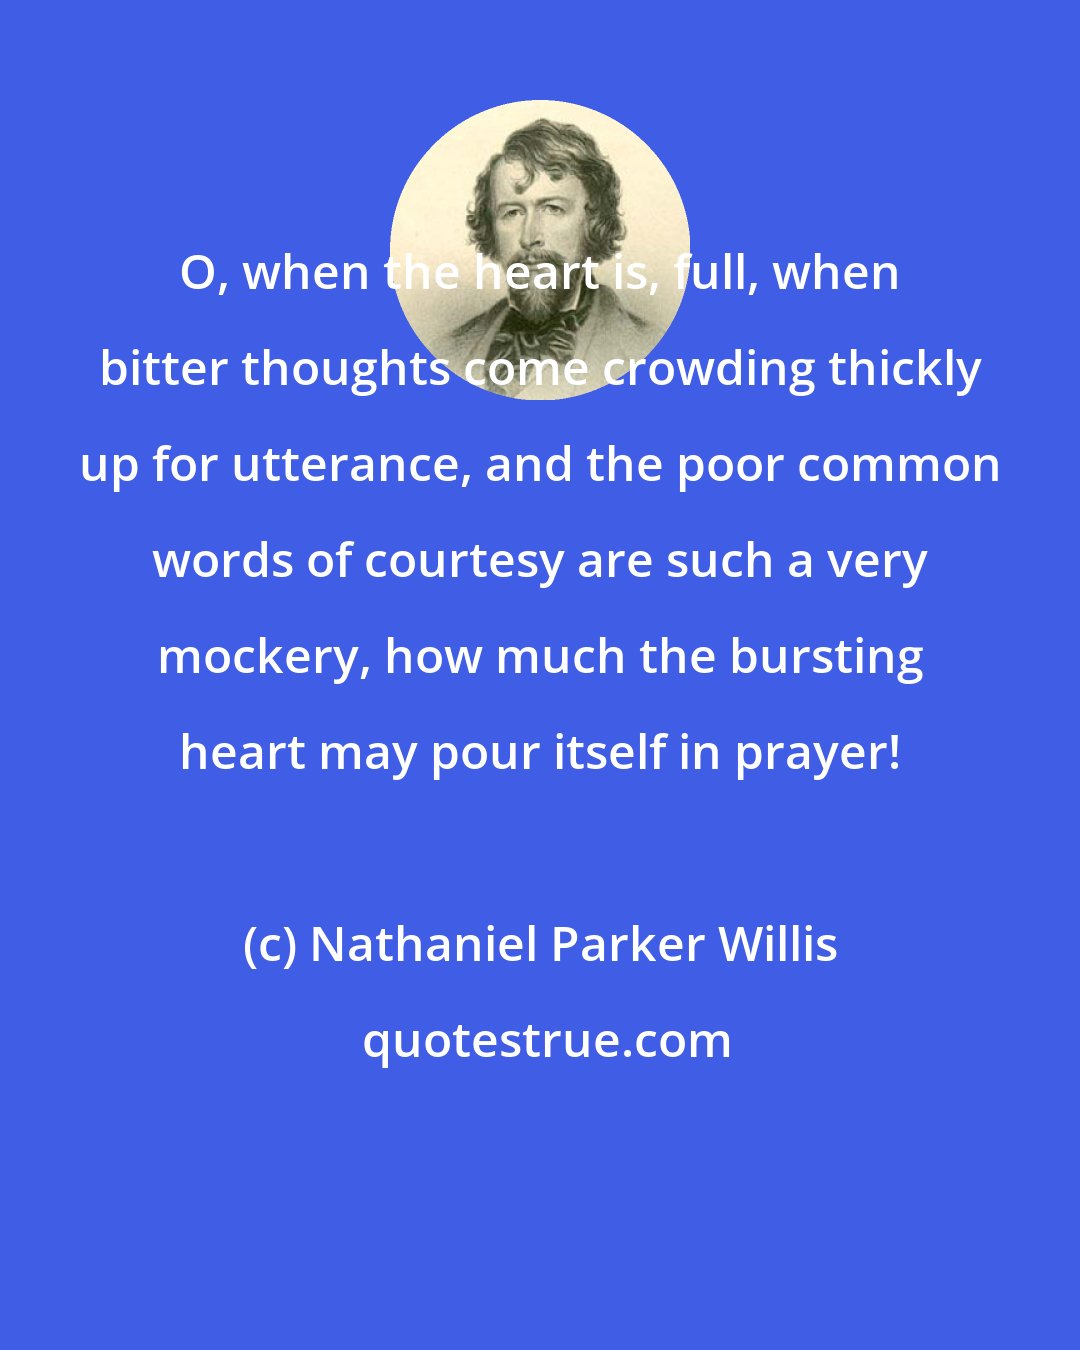 Nathaniel Parker Willis: O, when the heart is, full, when bitter thoughts come crowding thickly up for utterance, and the poor common words of courtesy are such a very mockery, how much the bursting heart may pour itself in prayer!